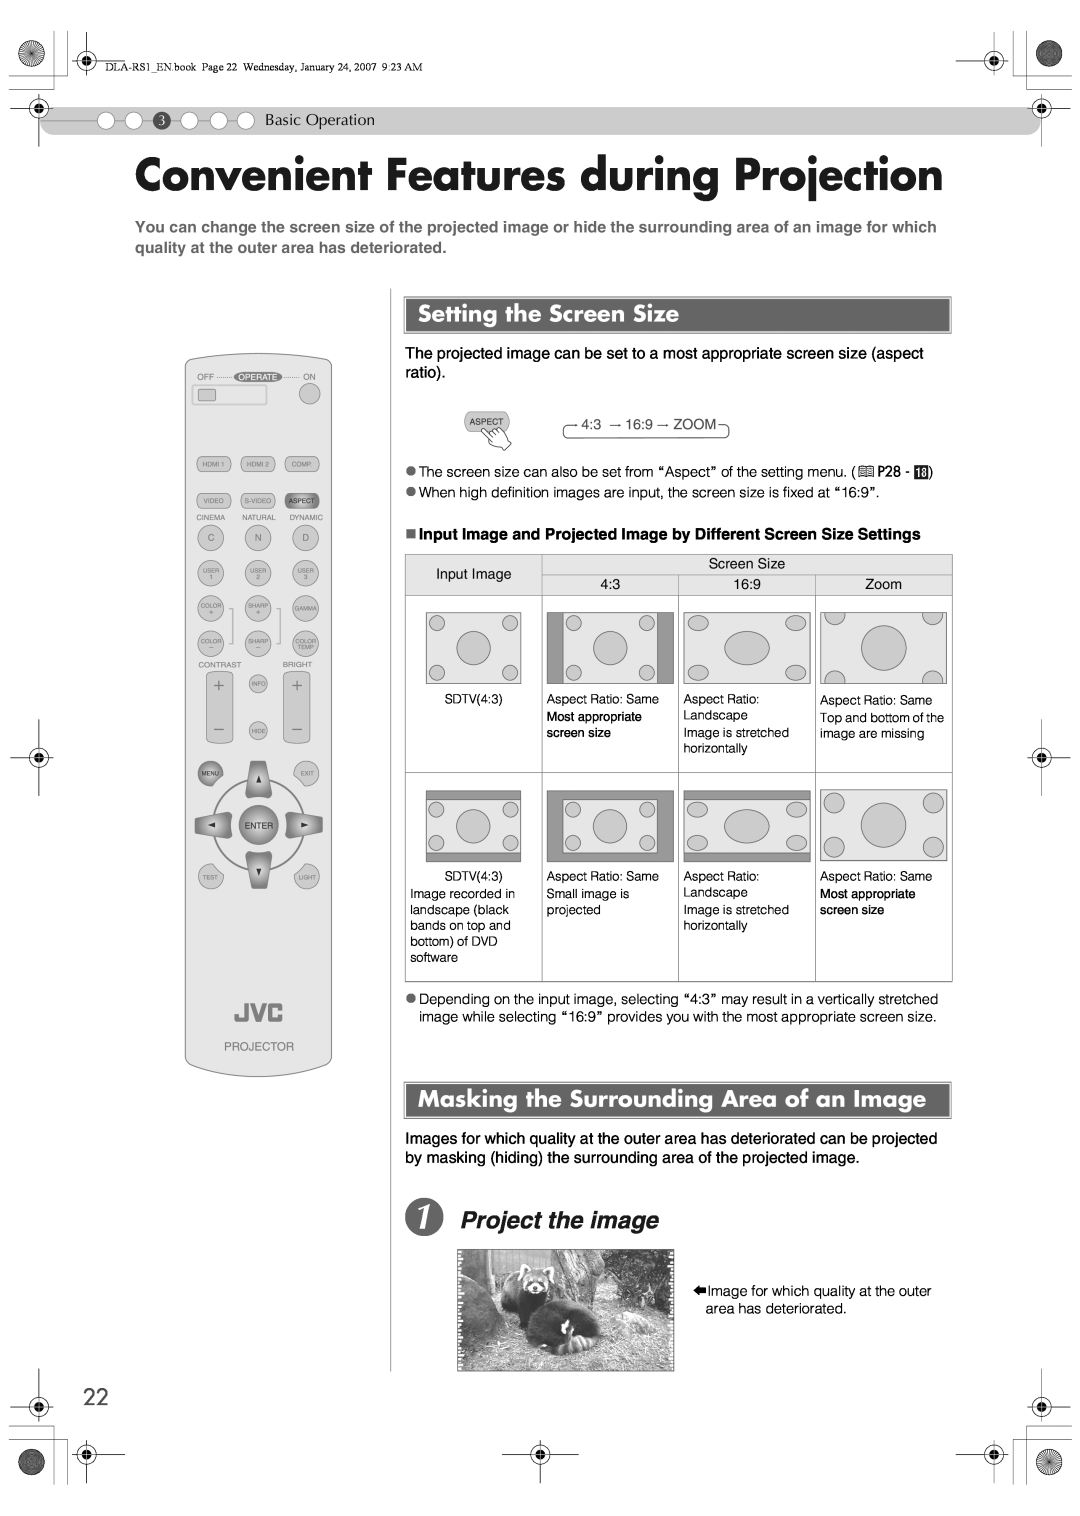 JVC DLA-RS1 manual Convenient Features during Projection, A Project the image, Setting the Screen Size, Basic Operation 